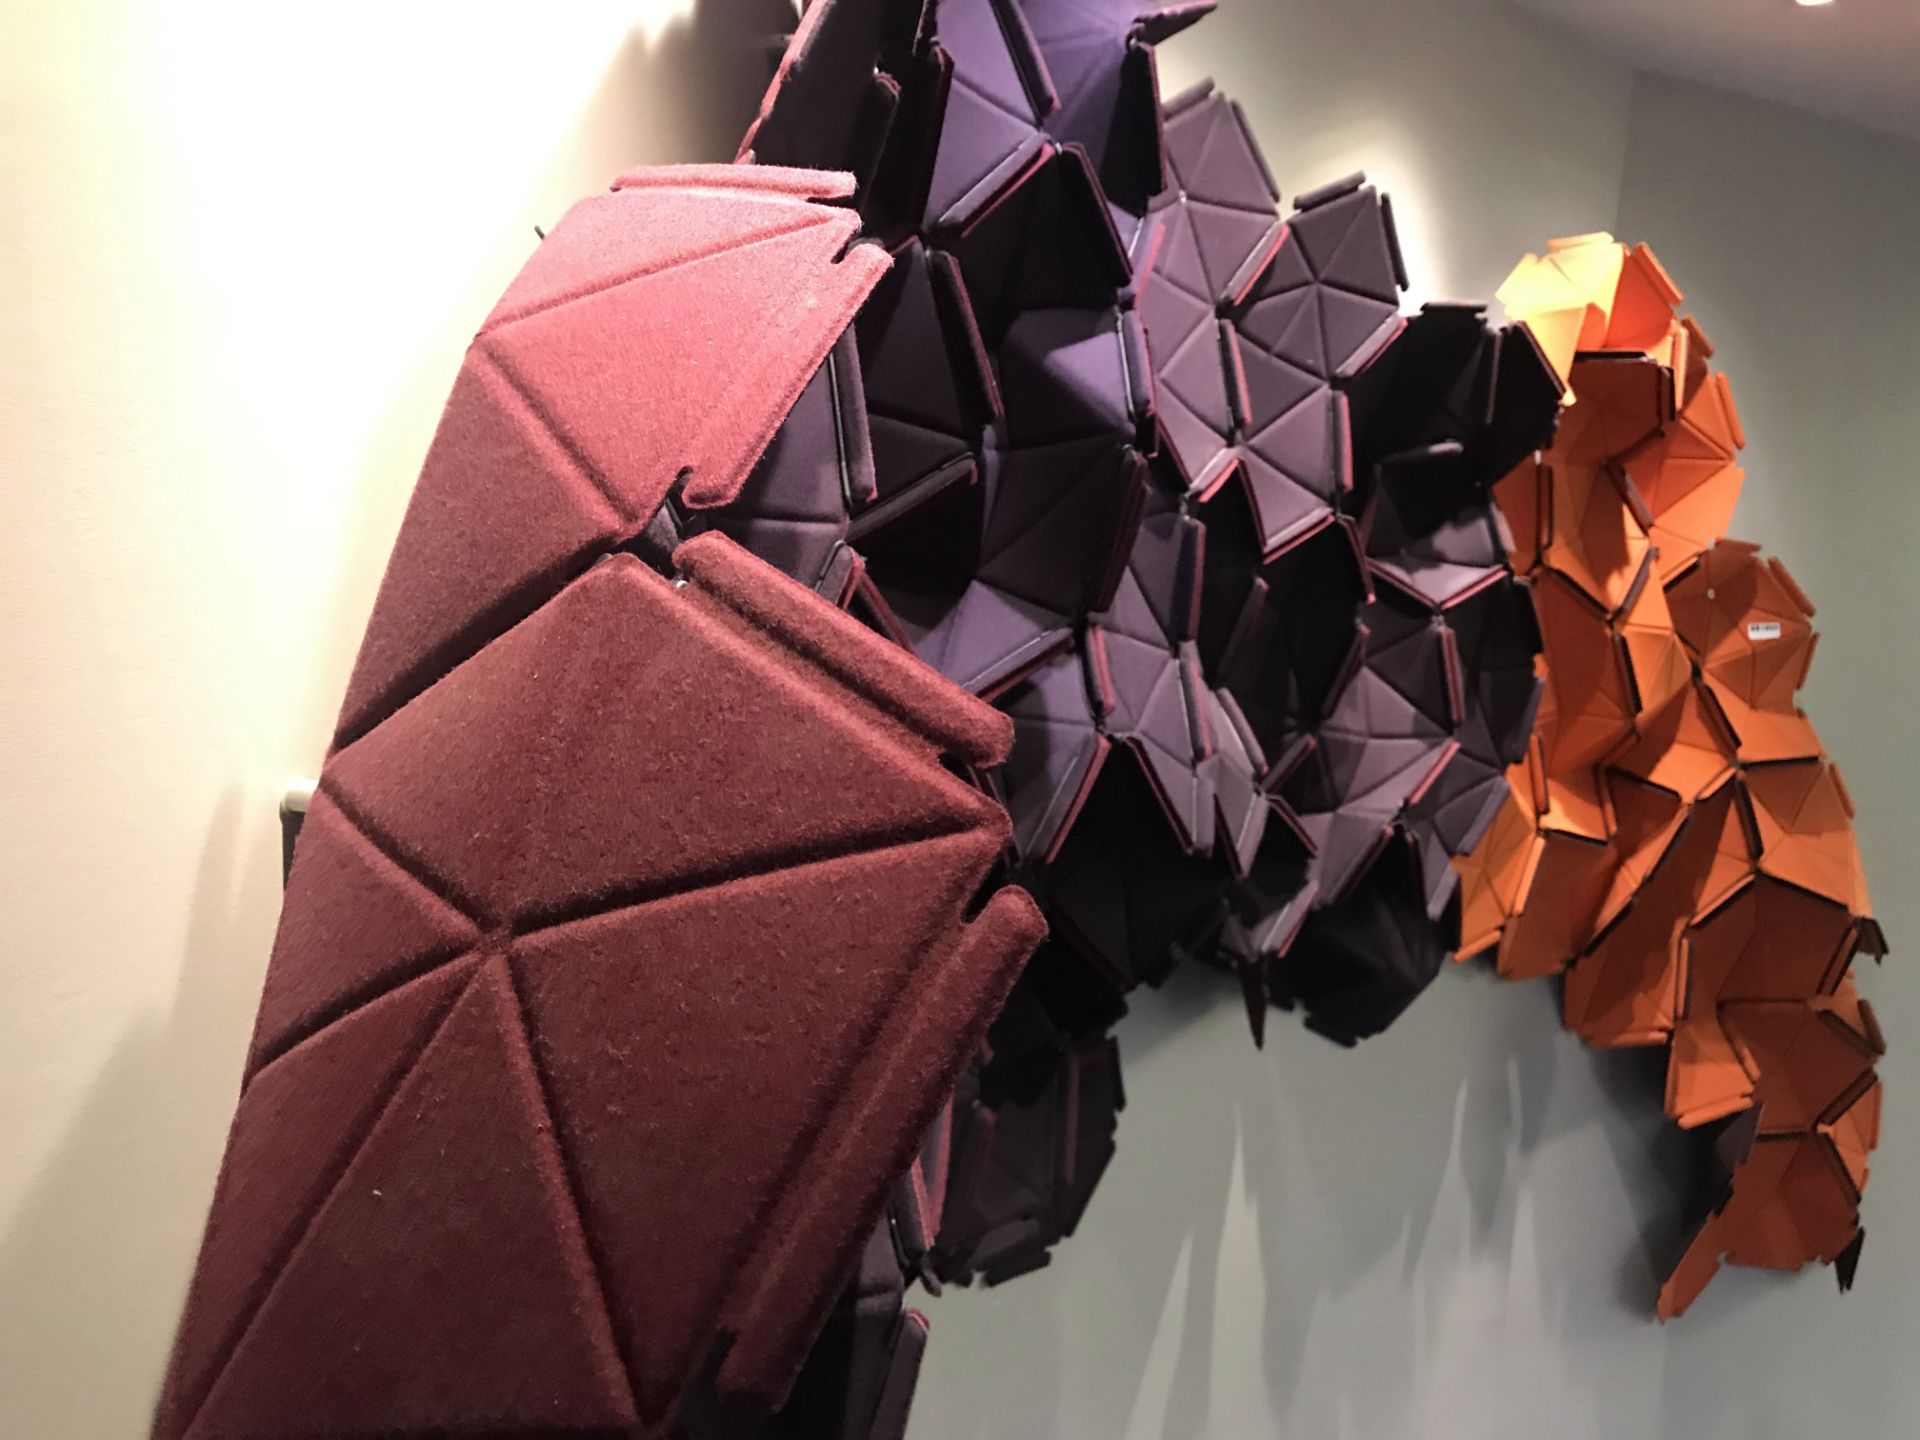 1 x Kvadrat Cloud Three-Dimensional Contemporary Wall Art - 100% Wool - Designed By Ronan and - Image 4 of 7